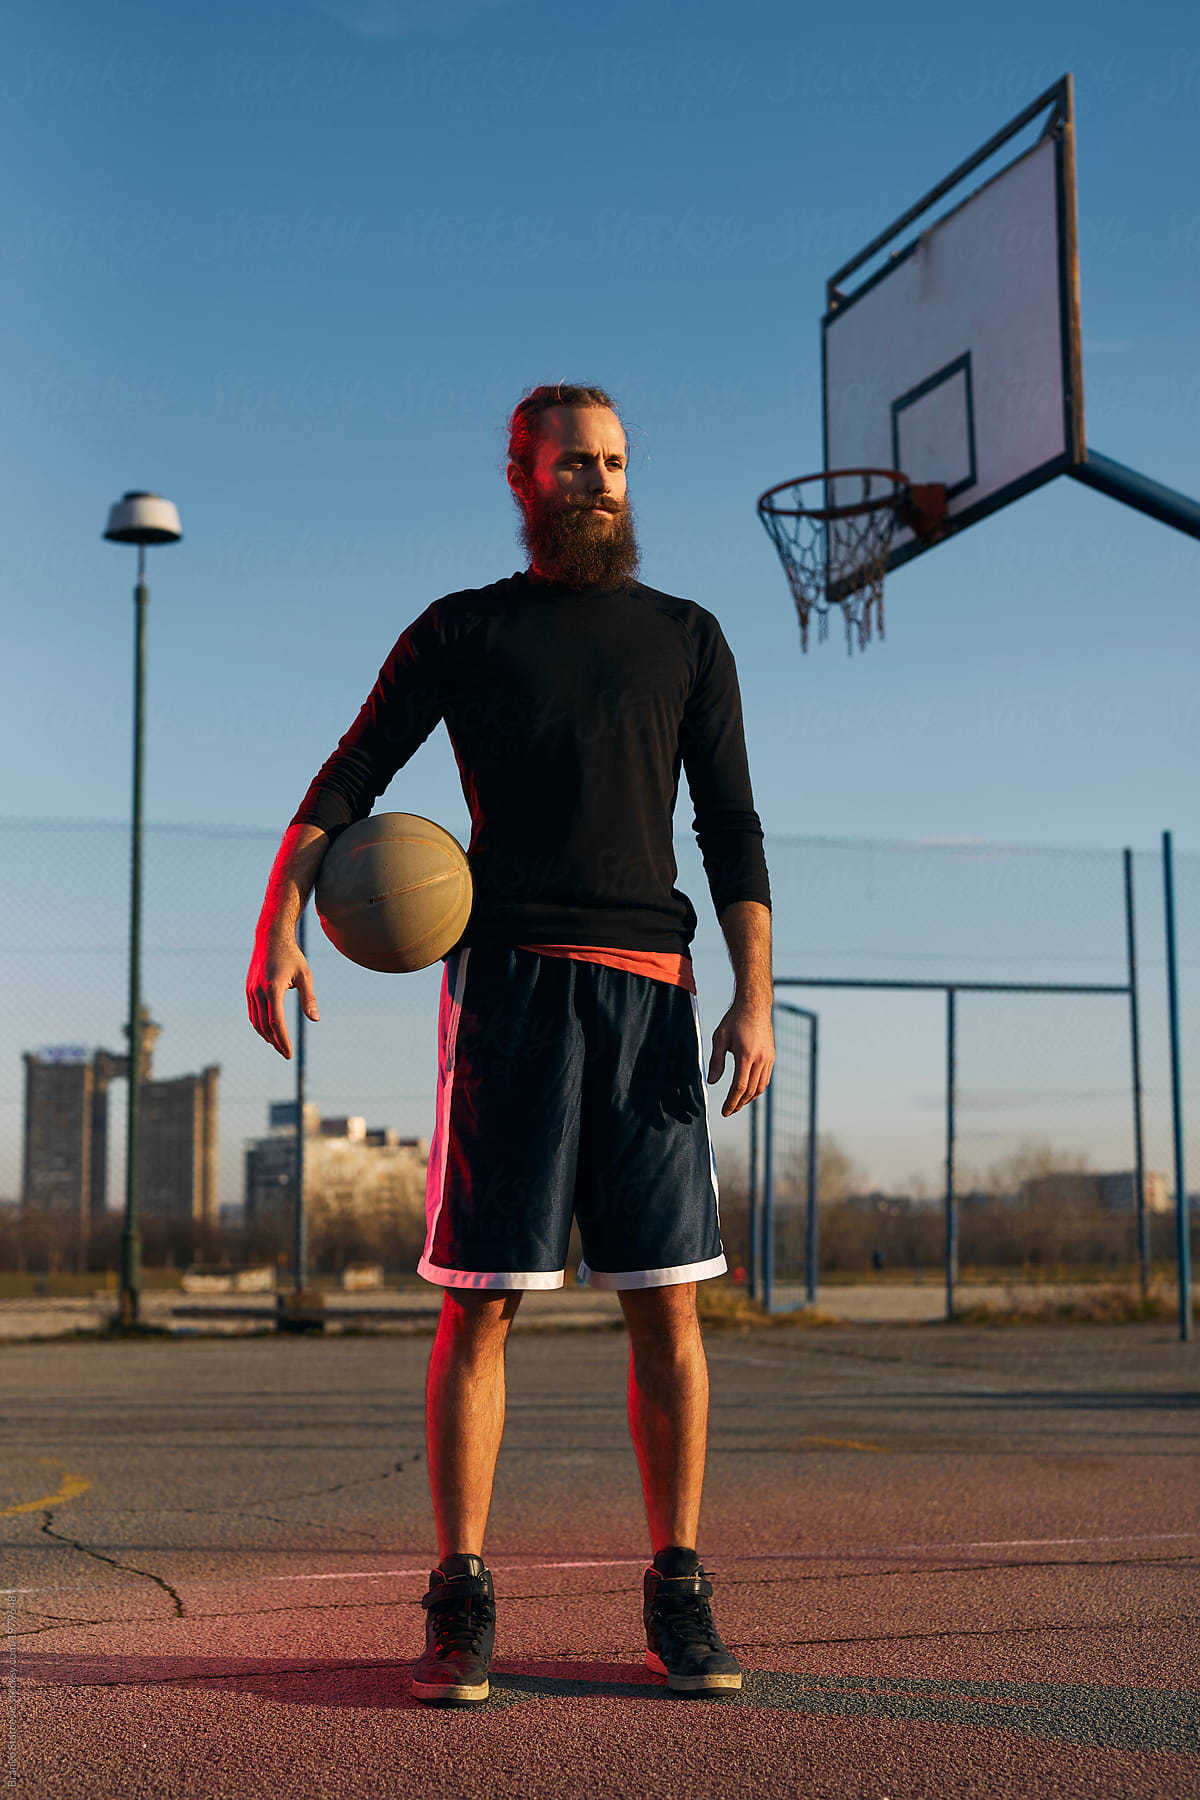 Portrait of street basketball player on the pitch holding ball.